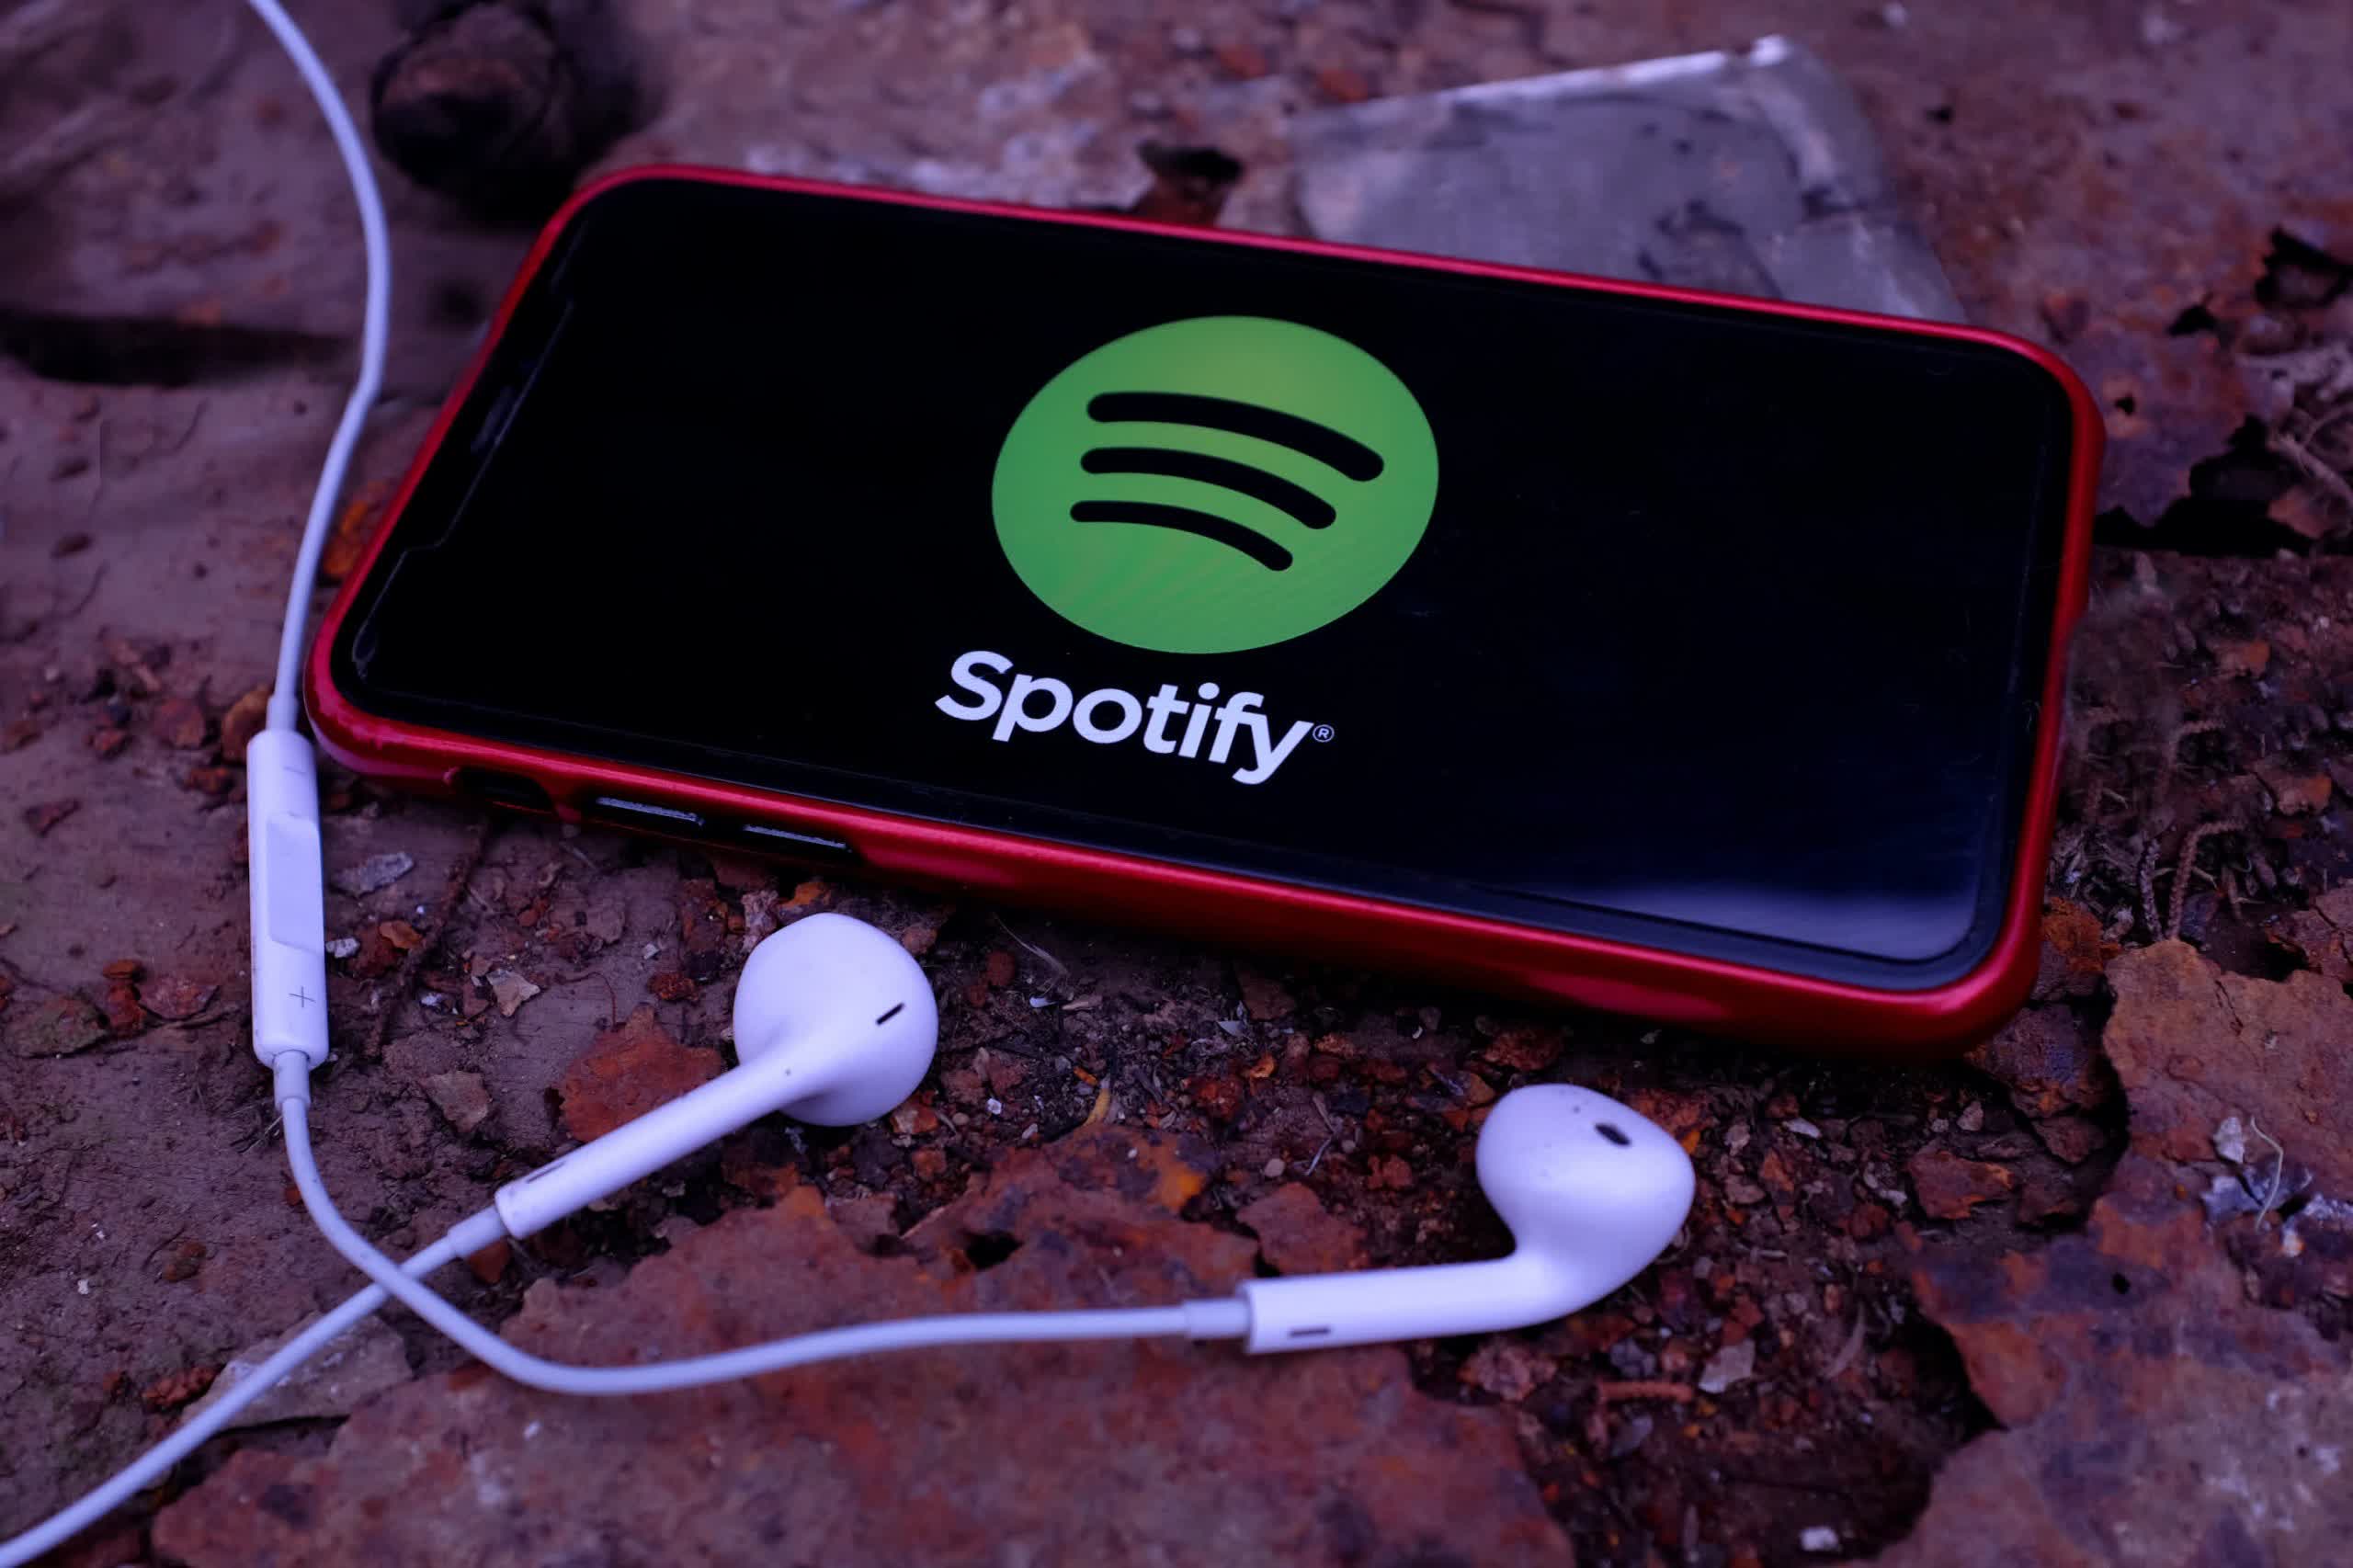 Spotify adds a record number of Q2 users, still loses money